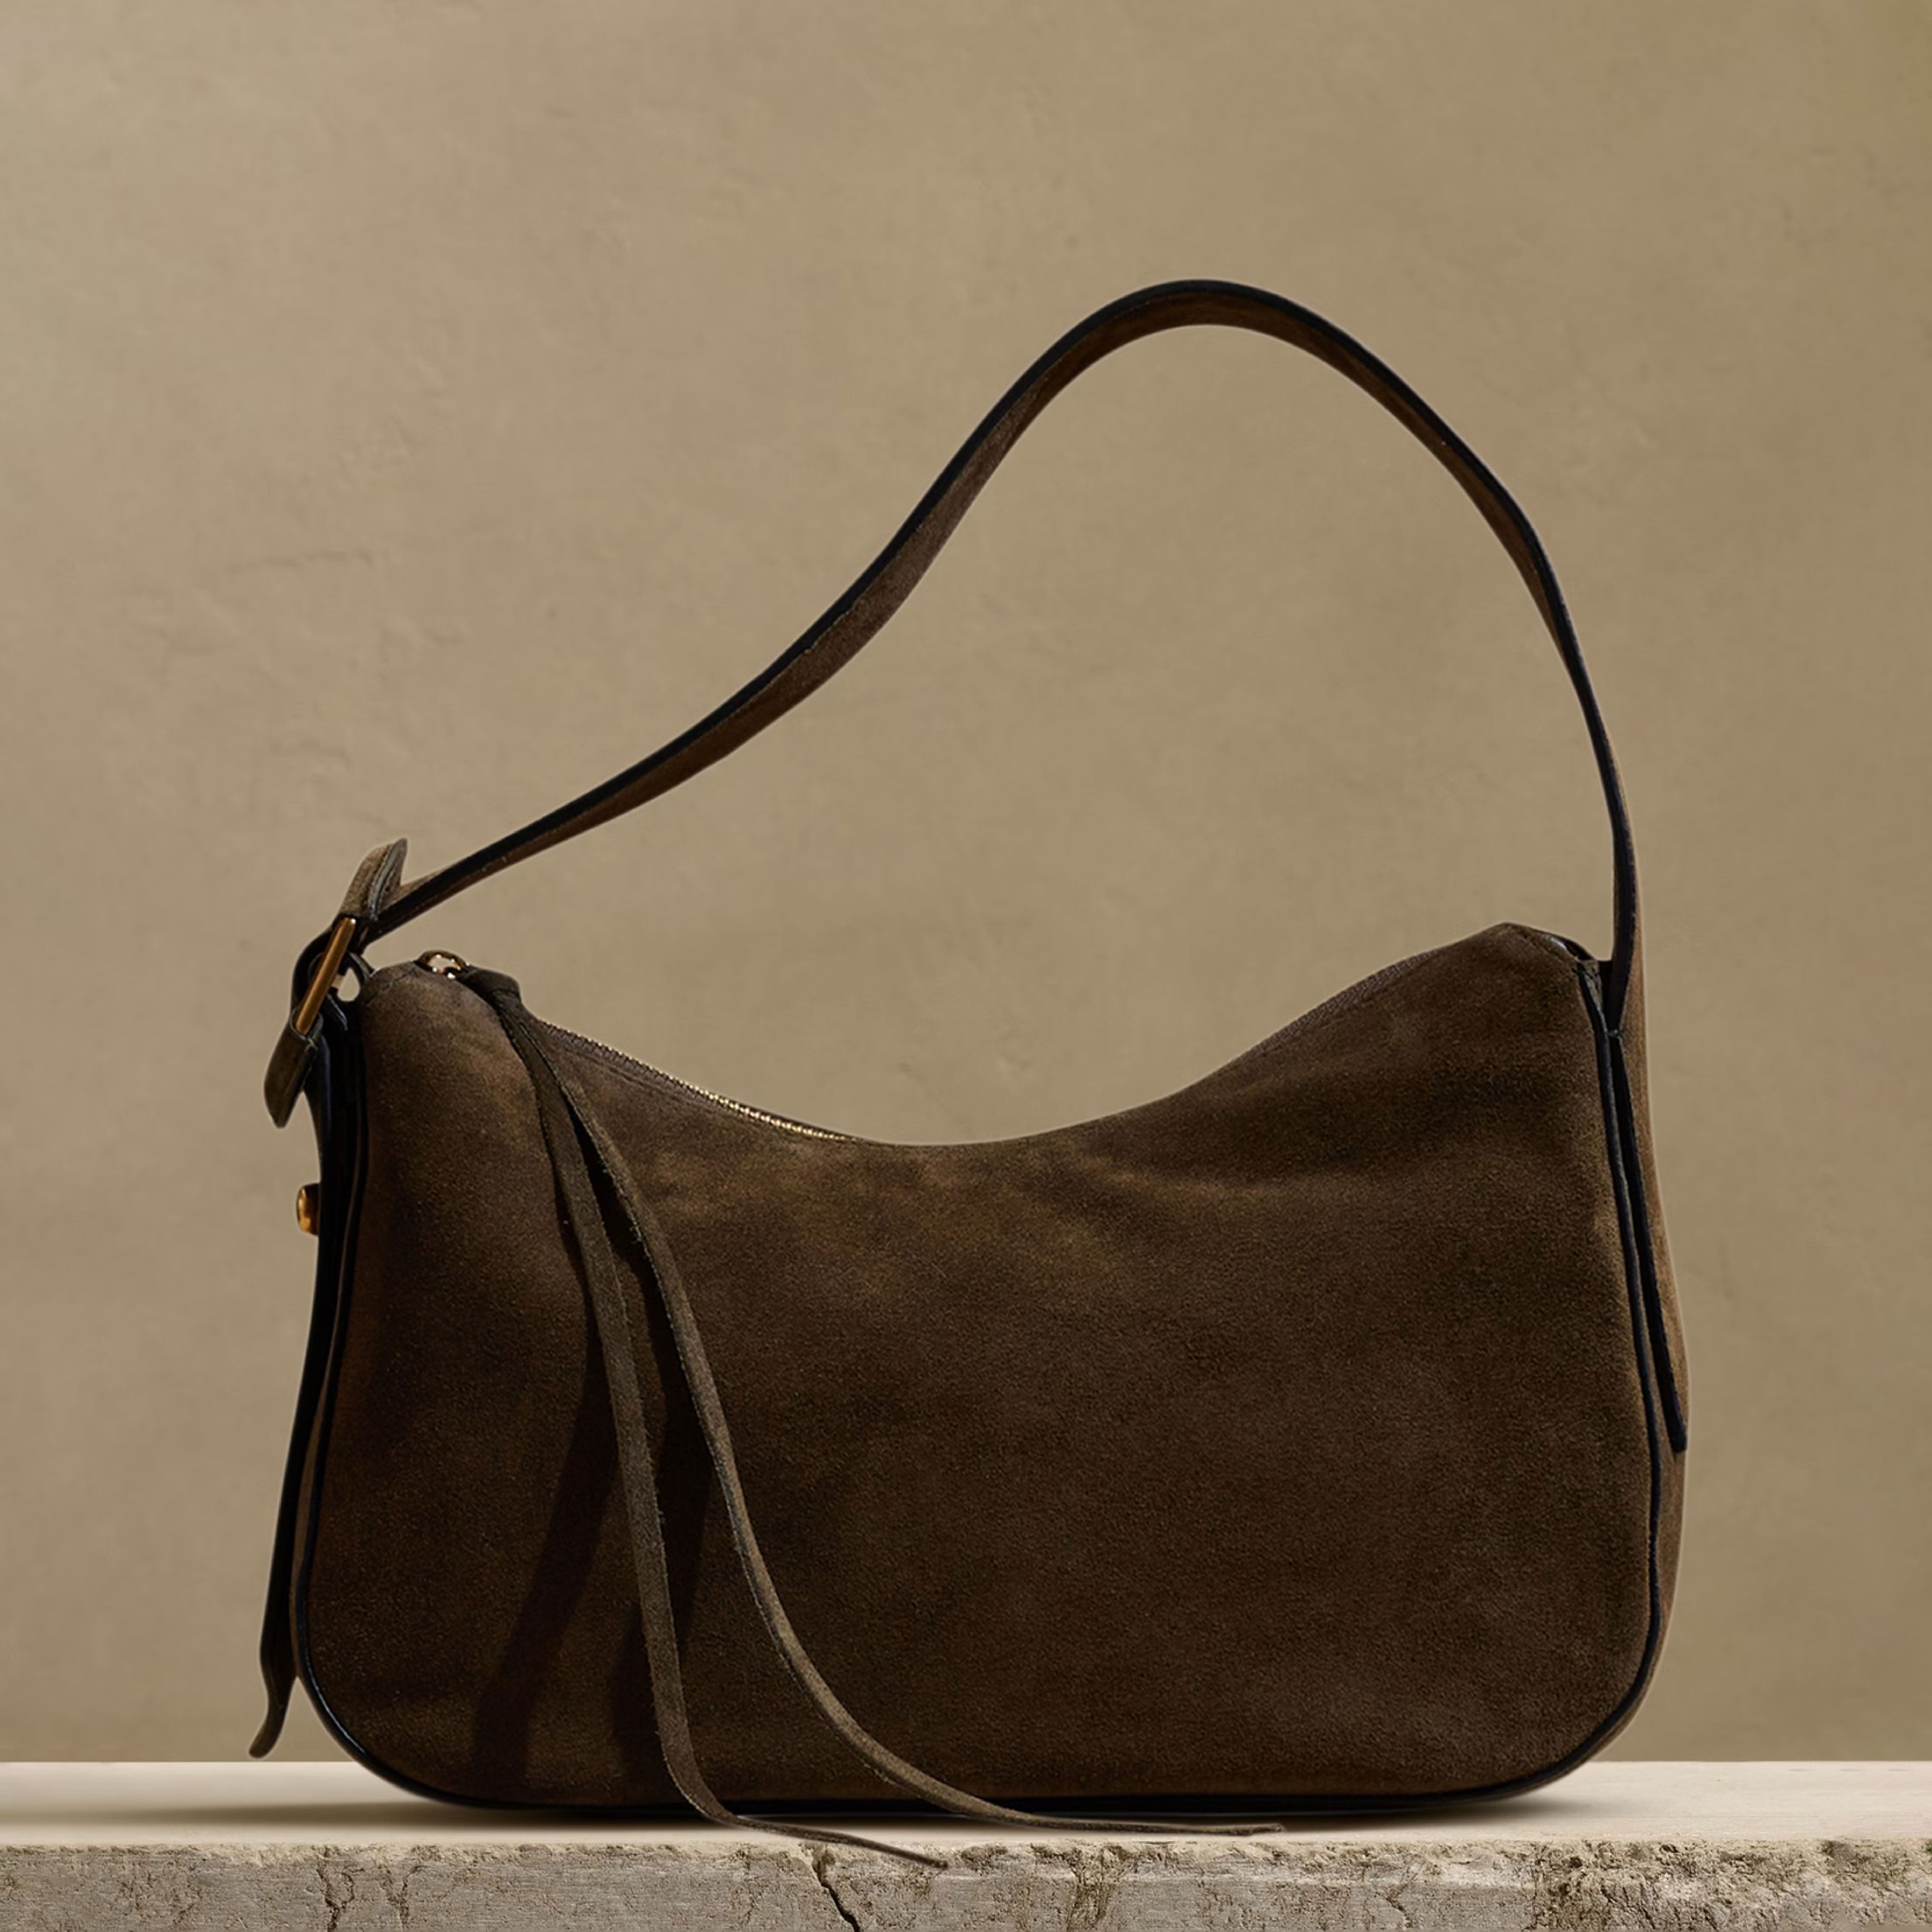 Suede Handbags Are Having a Moment